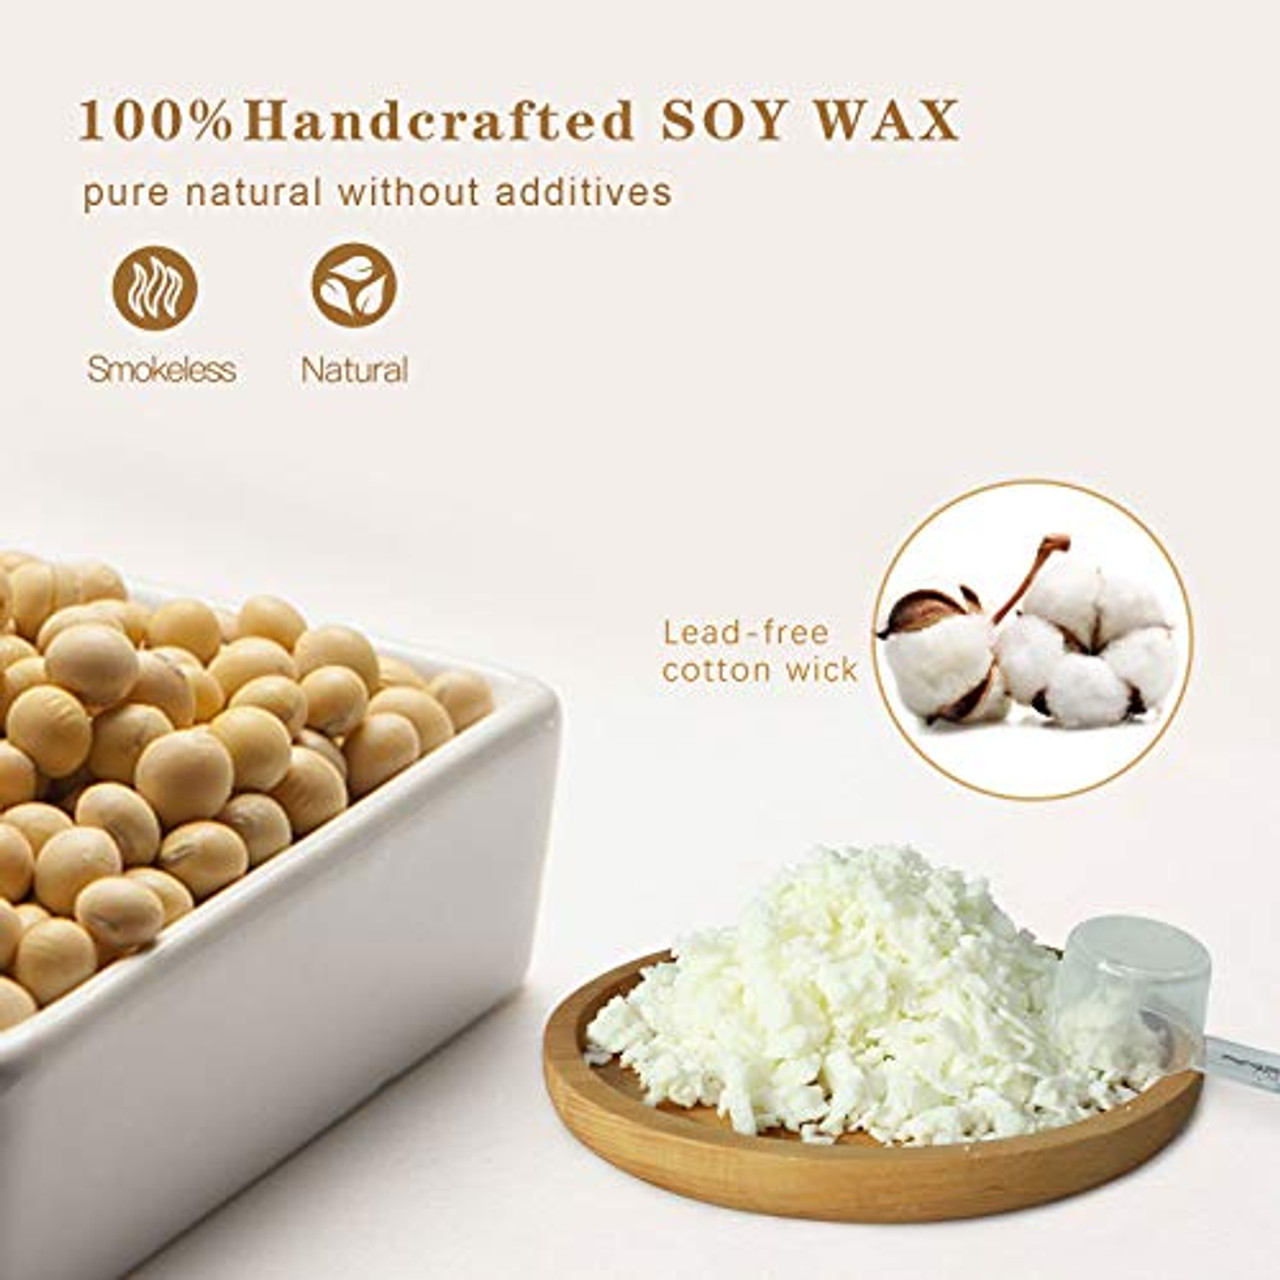 Hearts & Crafts Natural Soy Wax for Candle Making - 2 lbs Natural Soy Wax - 10 6-Inch Pre-Waxed Candle Wicks, 2 Metal Centering